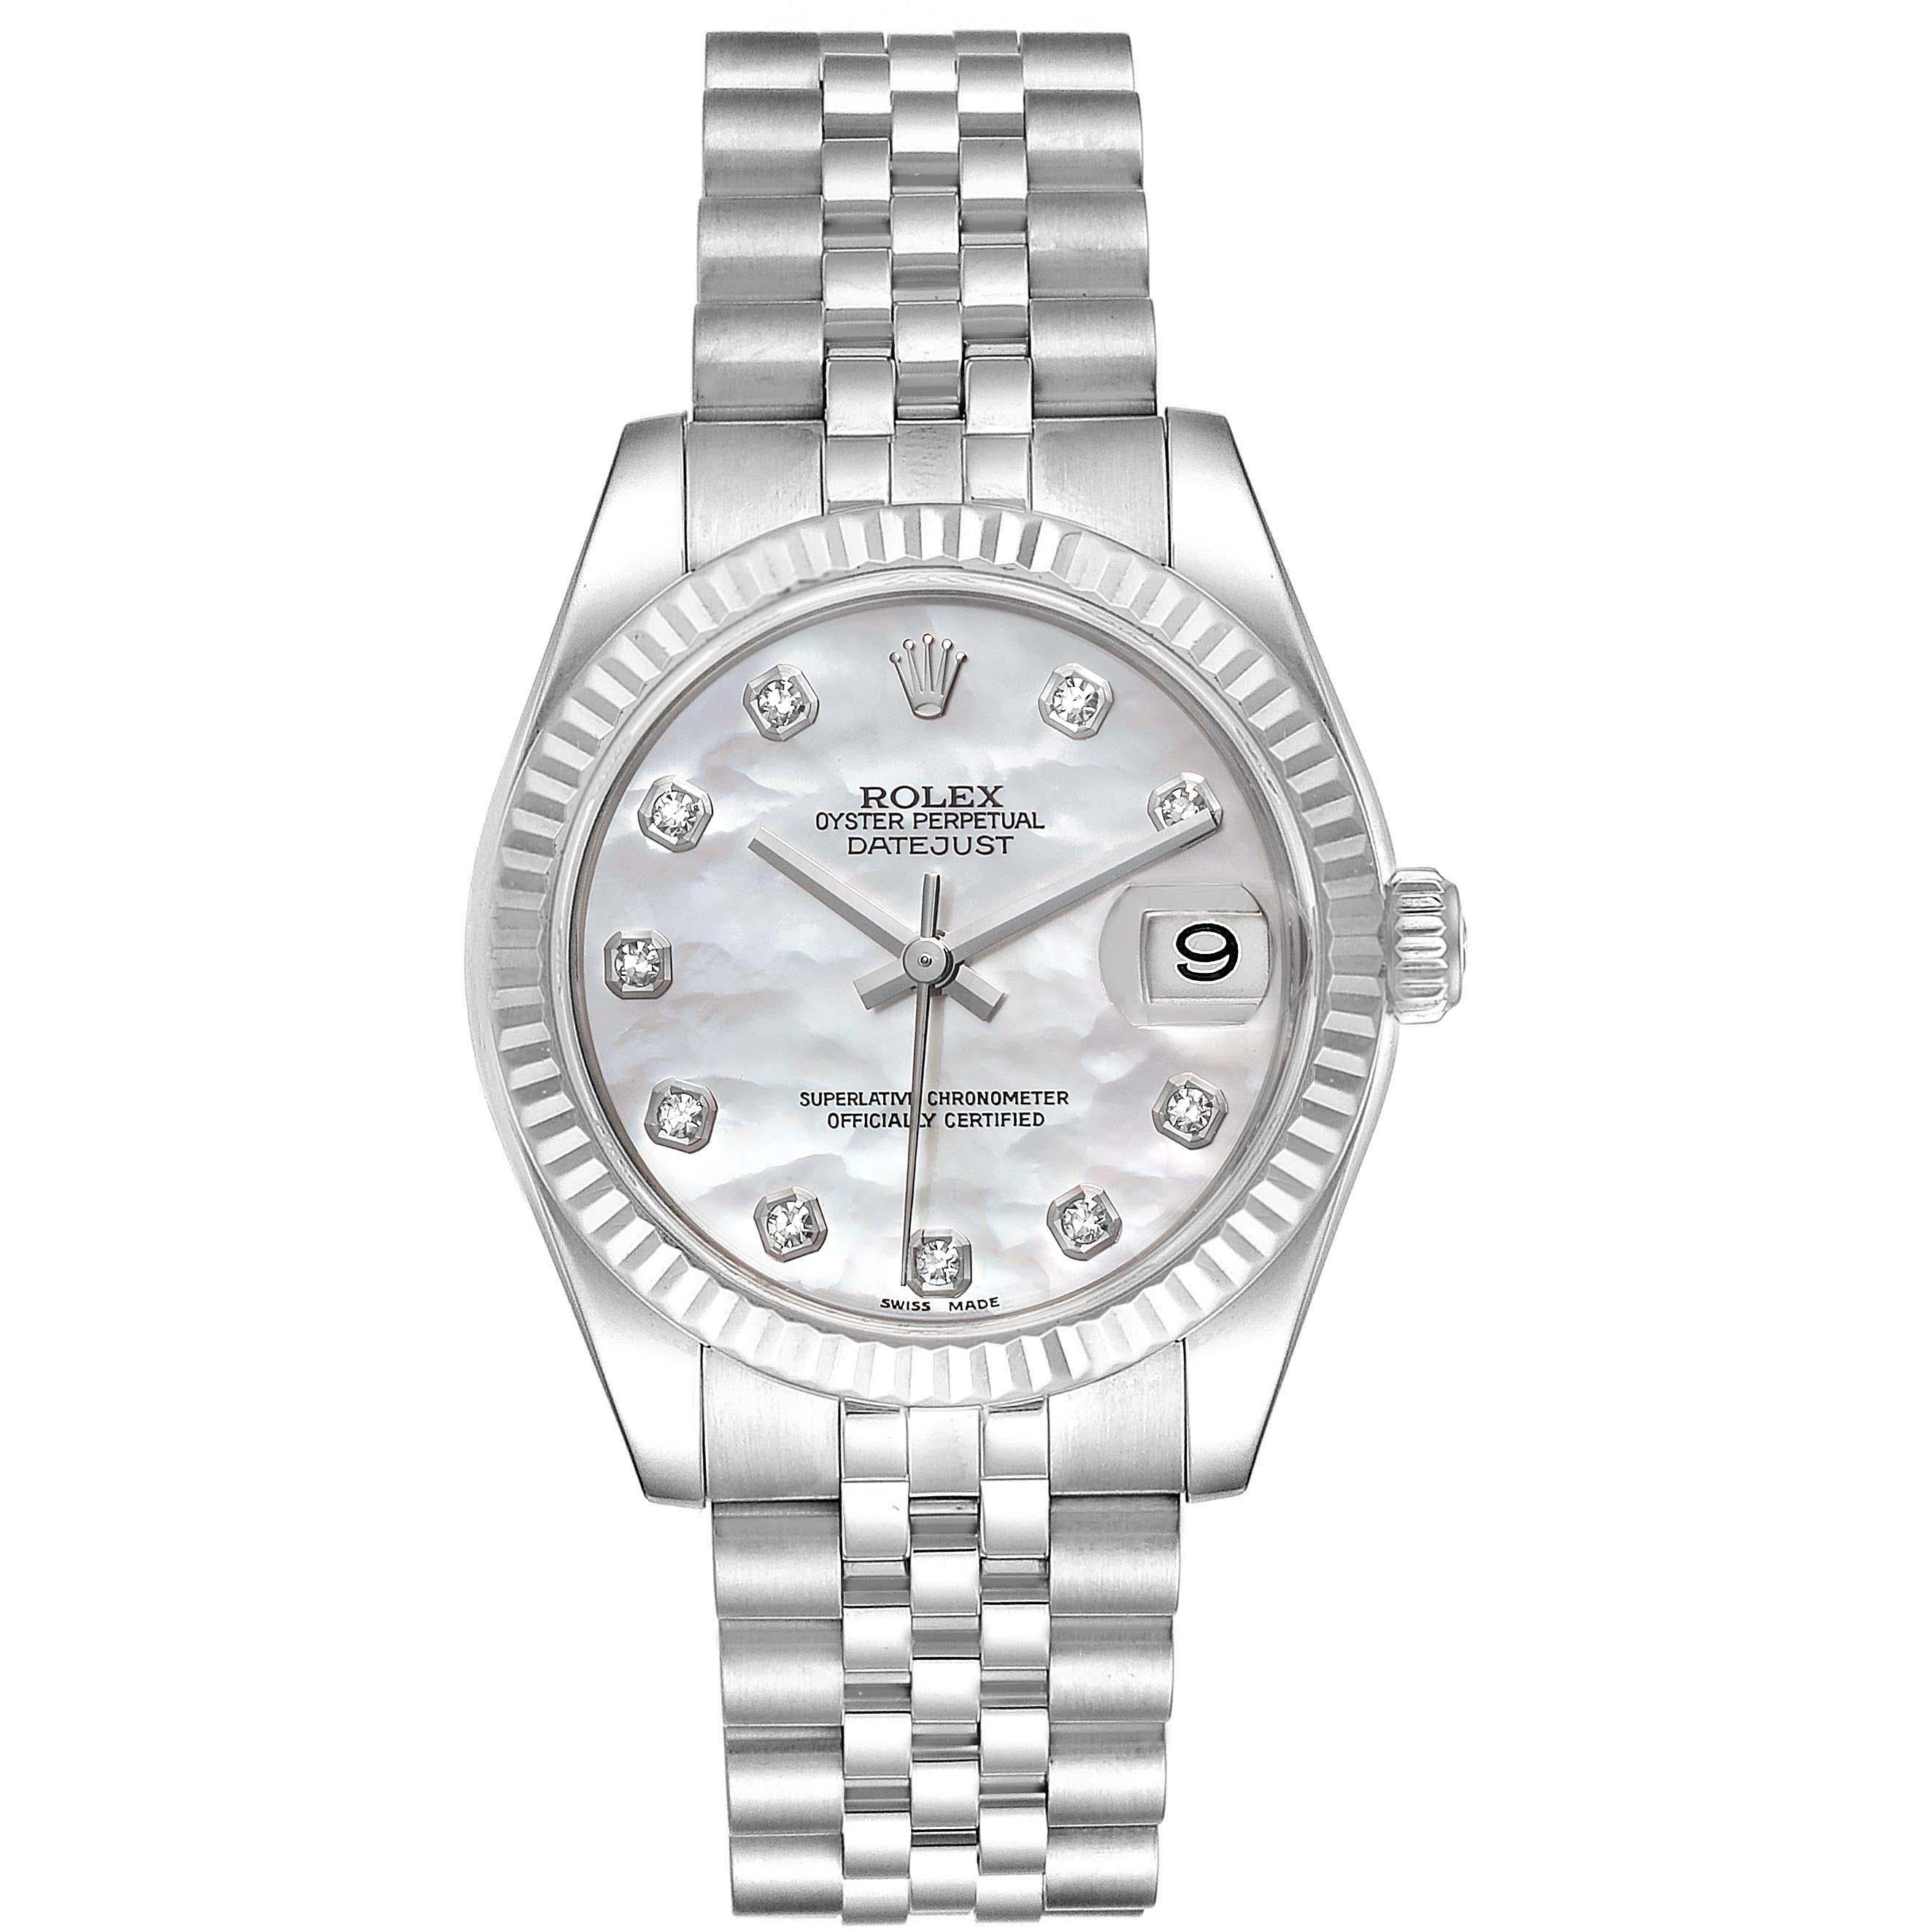 Rolex Datejust Midsize Steel White Gold MOP Diamond Ladies Watch 178274. Officially certified chronometer self-winding movement. Stainless steel oyster case 31.0 mm in diameter. Rolex logo on a crown. Scratch resistant sapphire crystal with cyclops